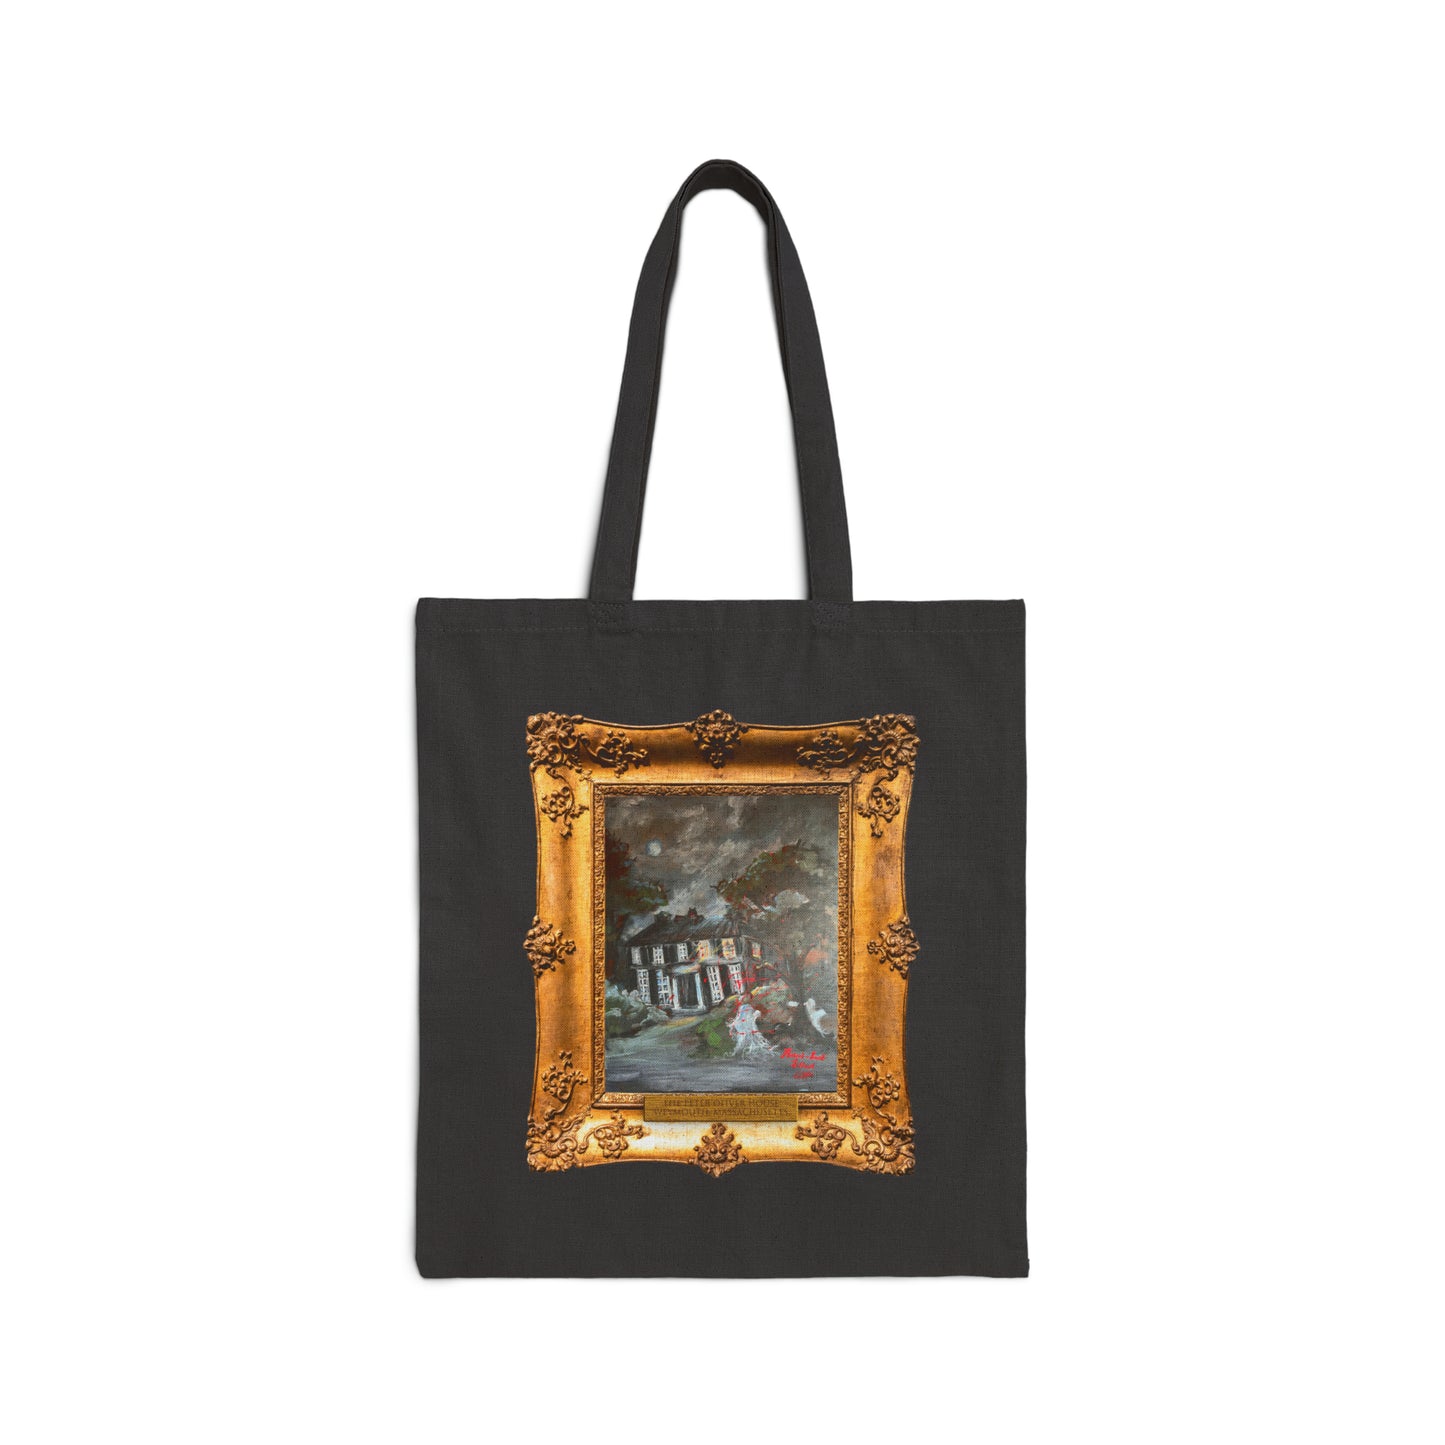 The Richard-Lael Gallery "The Peter Oliver House" Tote Bag